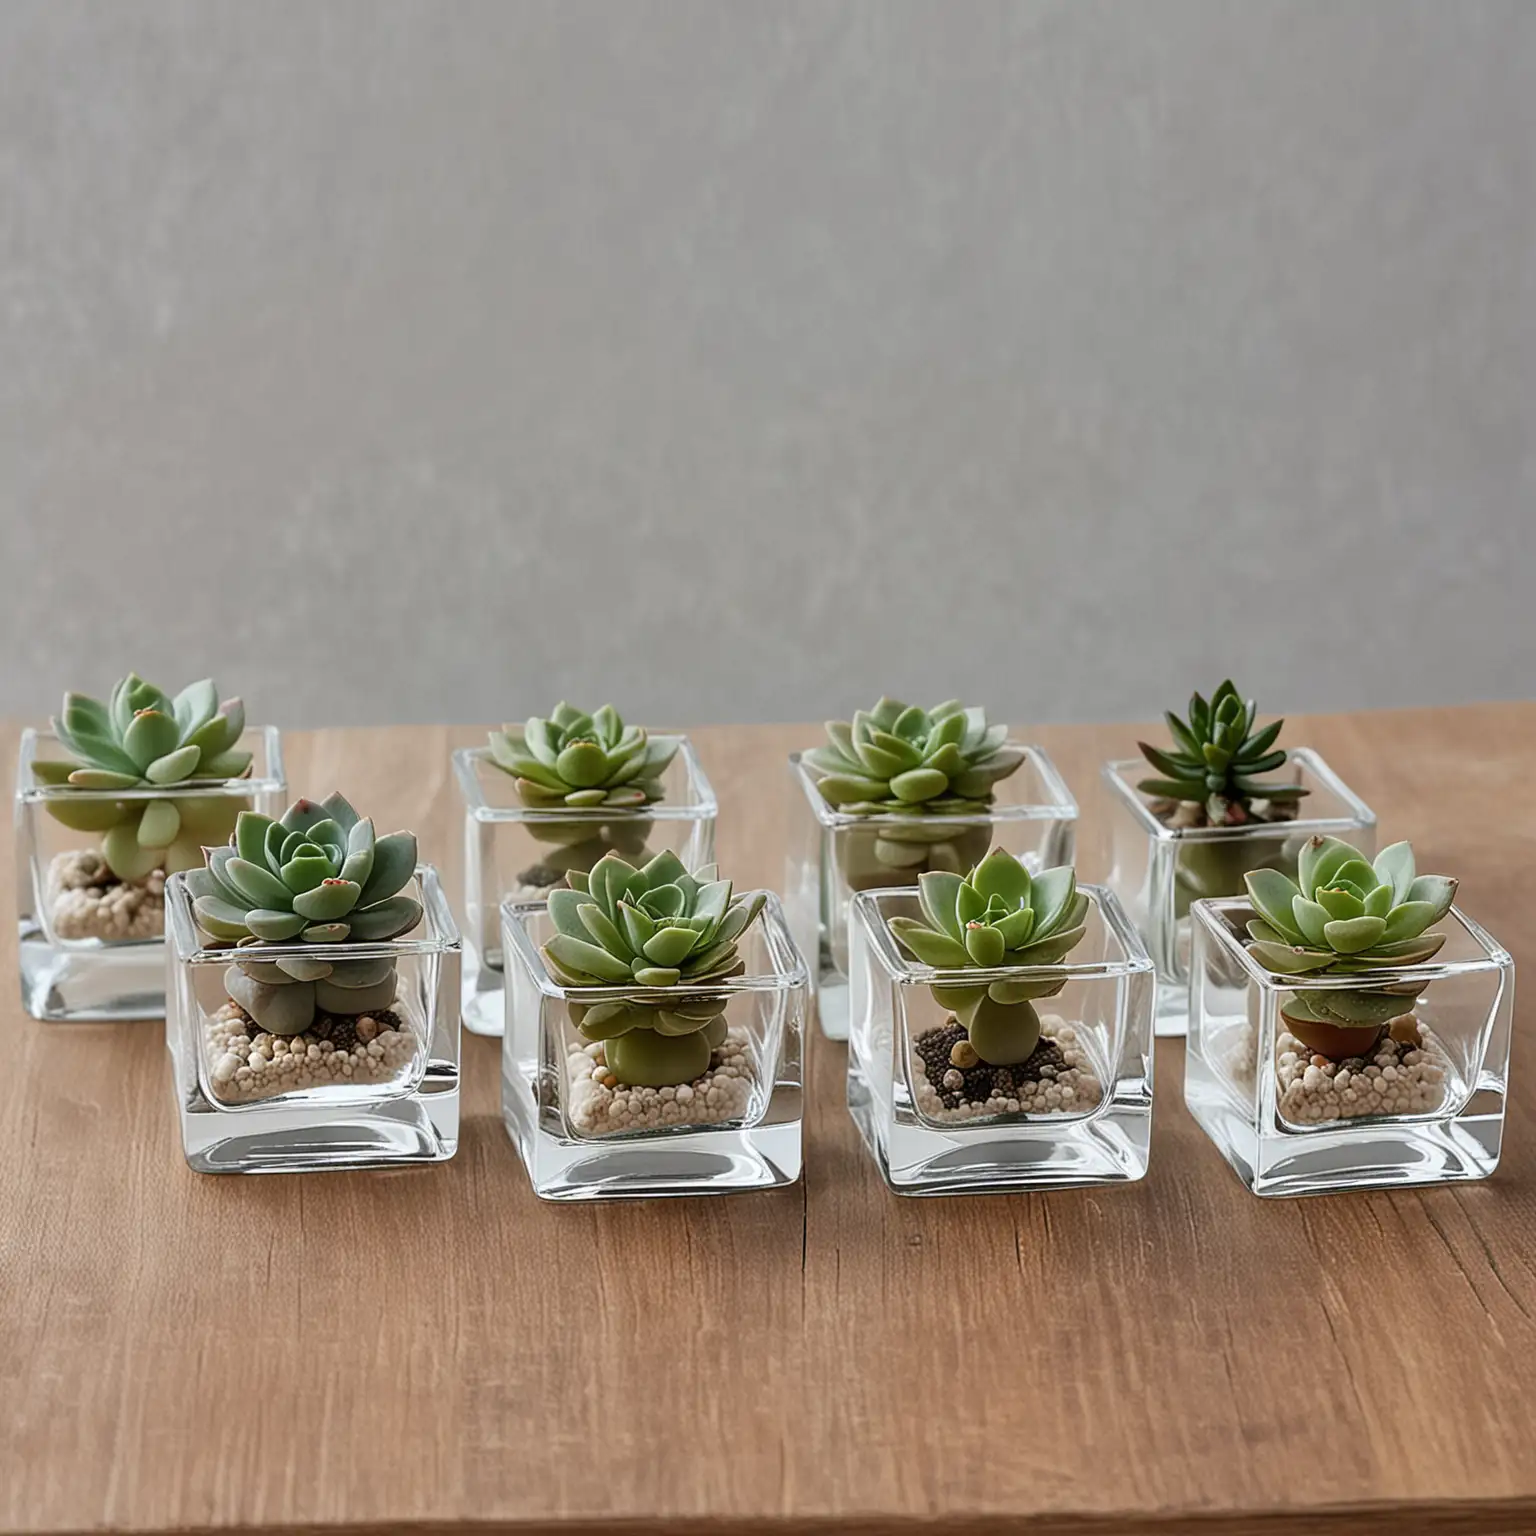 Minimalist-Small-Wedding-Table-Centerpiece-with-Clear-Glass-Square-Vases-and-Succulents